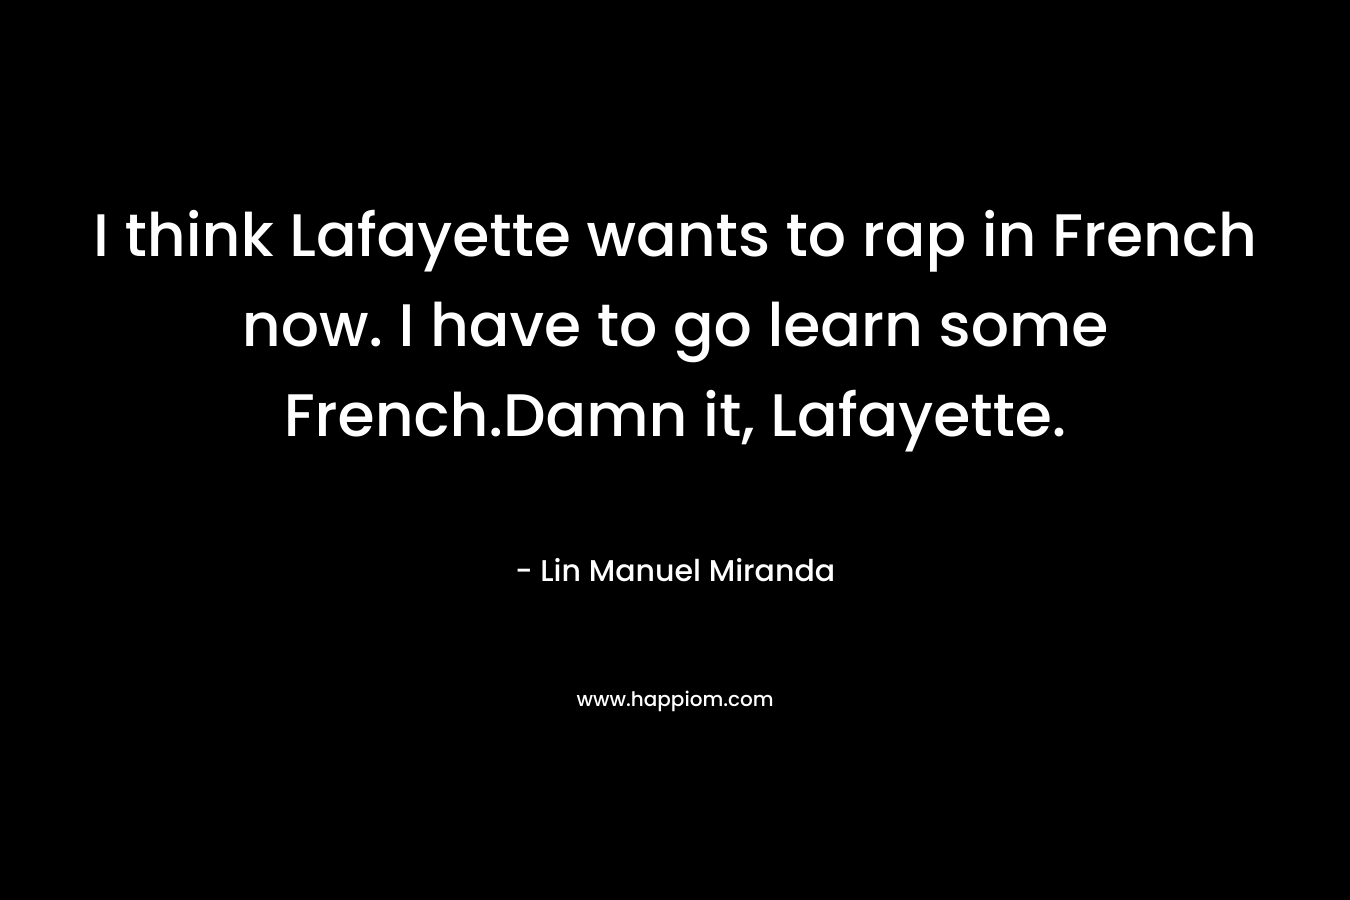 I think Lafayette wants to rap in French now. I have to go learn some French.Damn it, Lafayette.